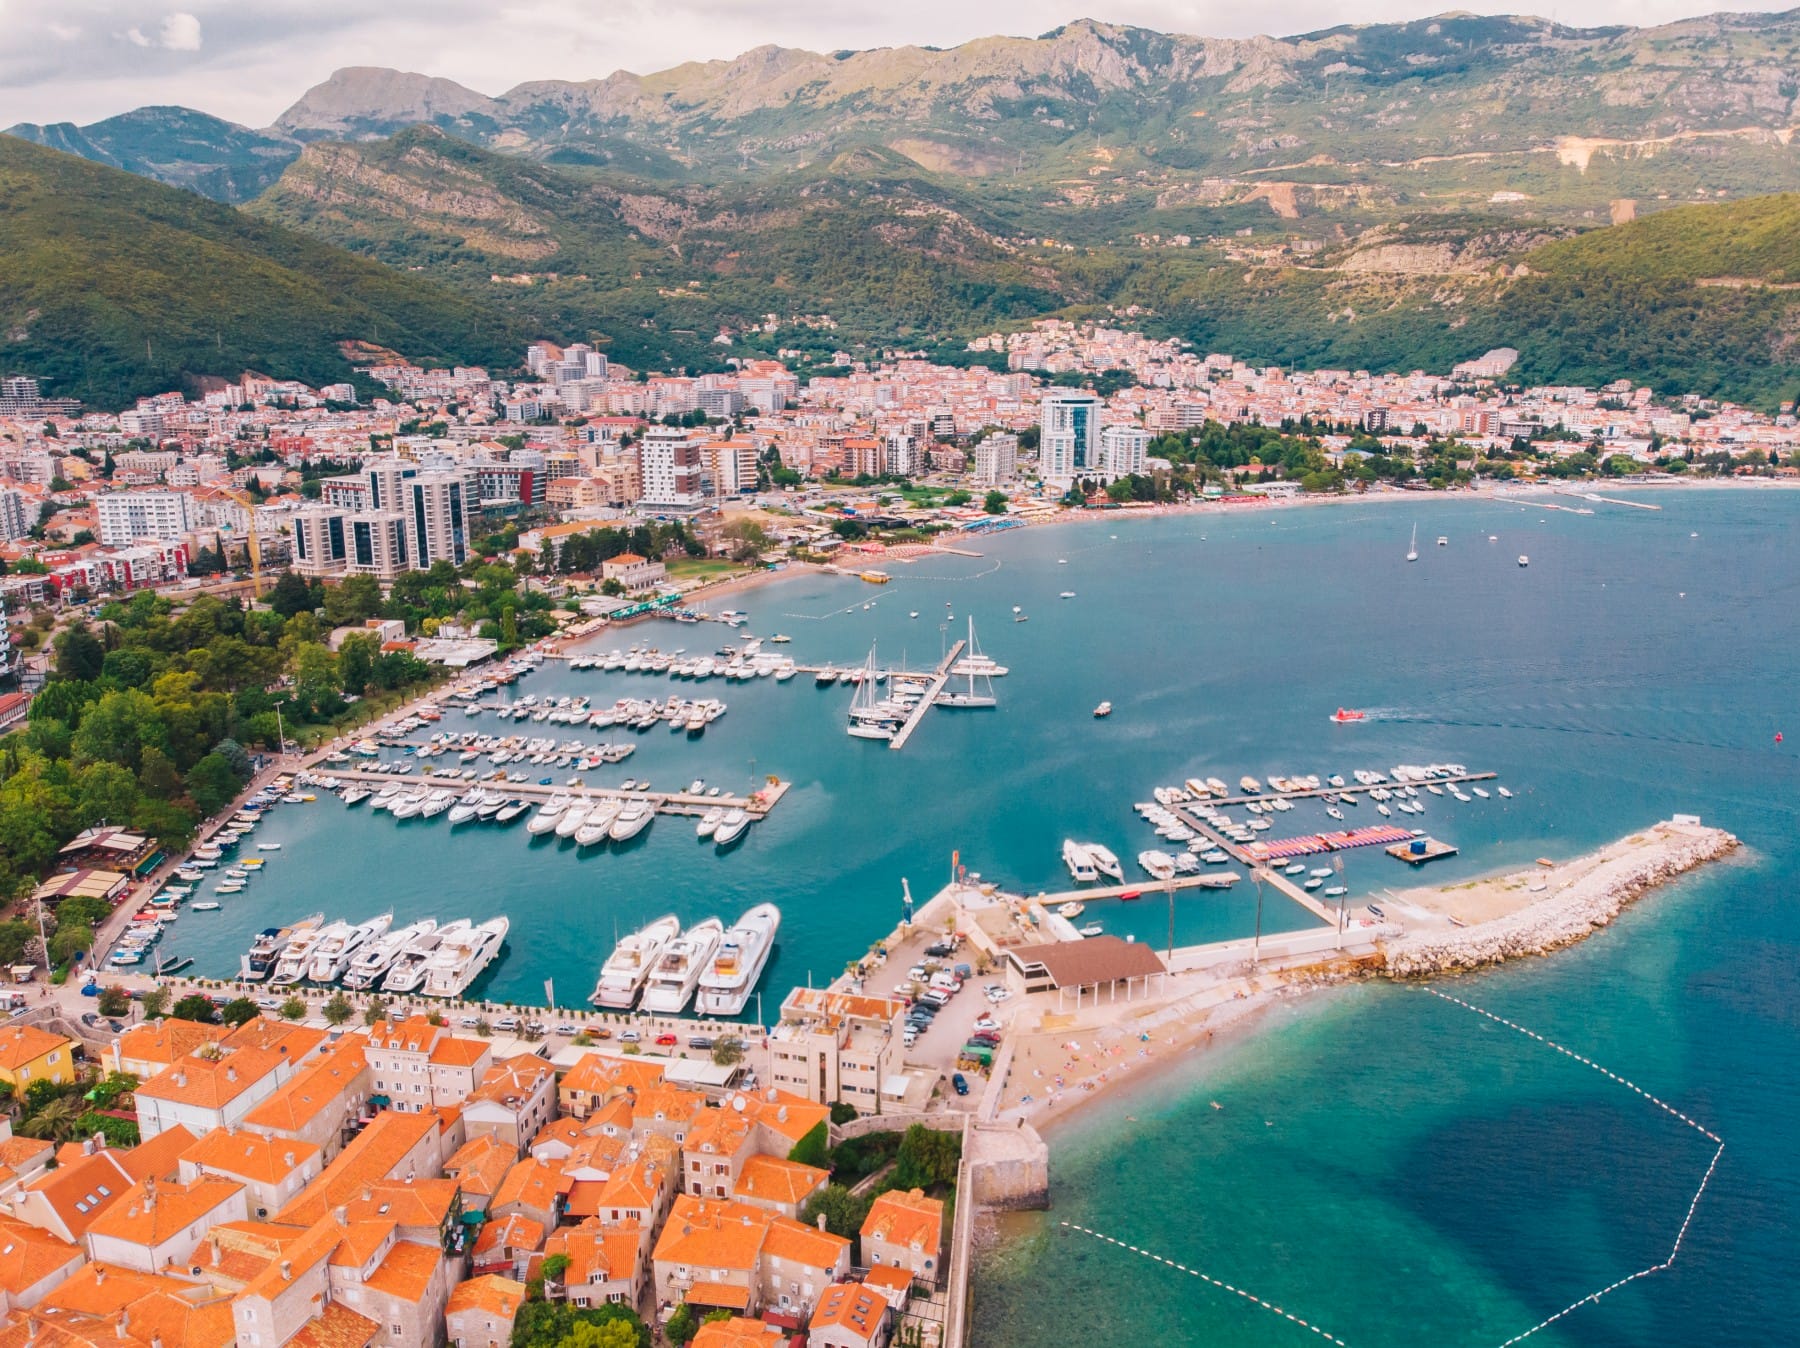 View from the air to the shore of budva in montenegro, summer day